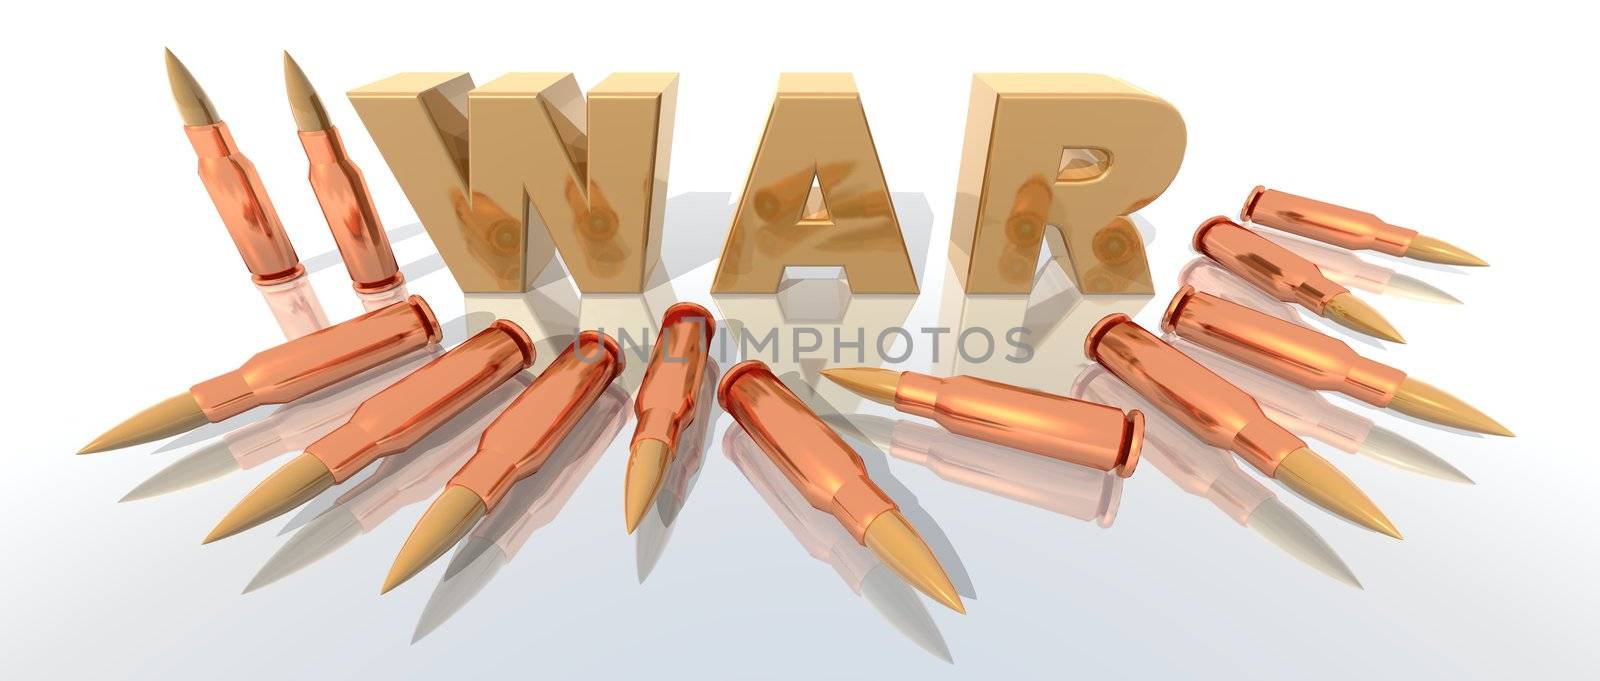 a 3d rendering to illustrate war with some bullets